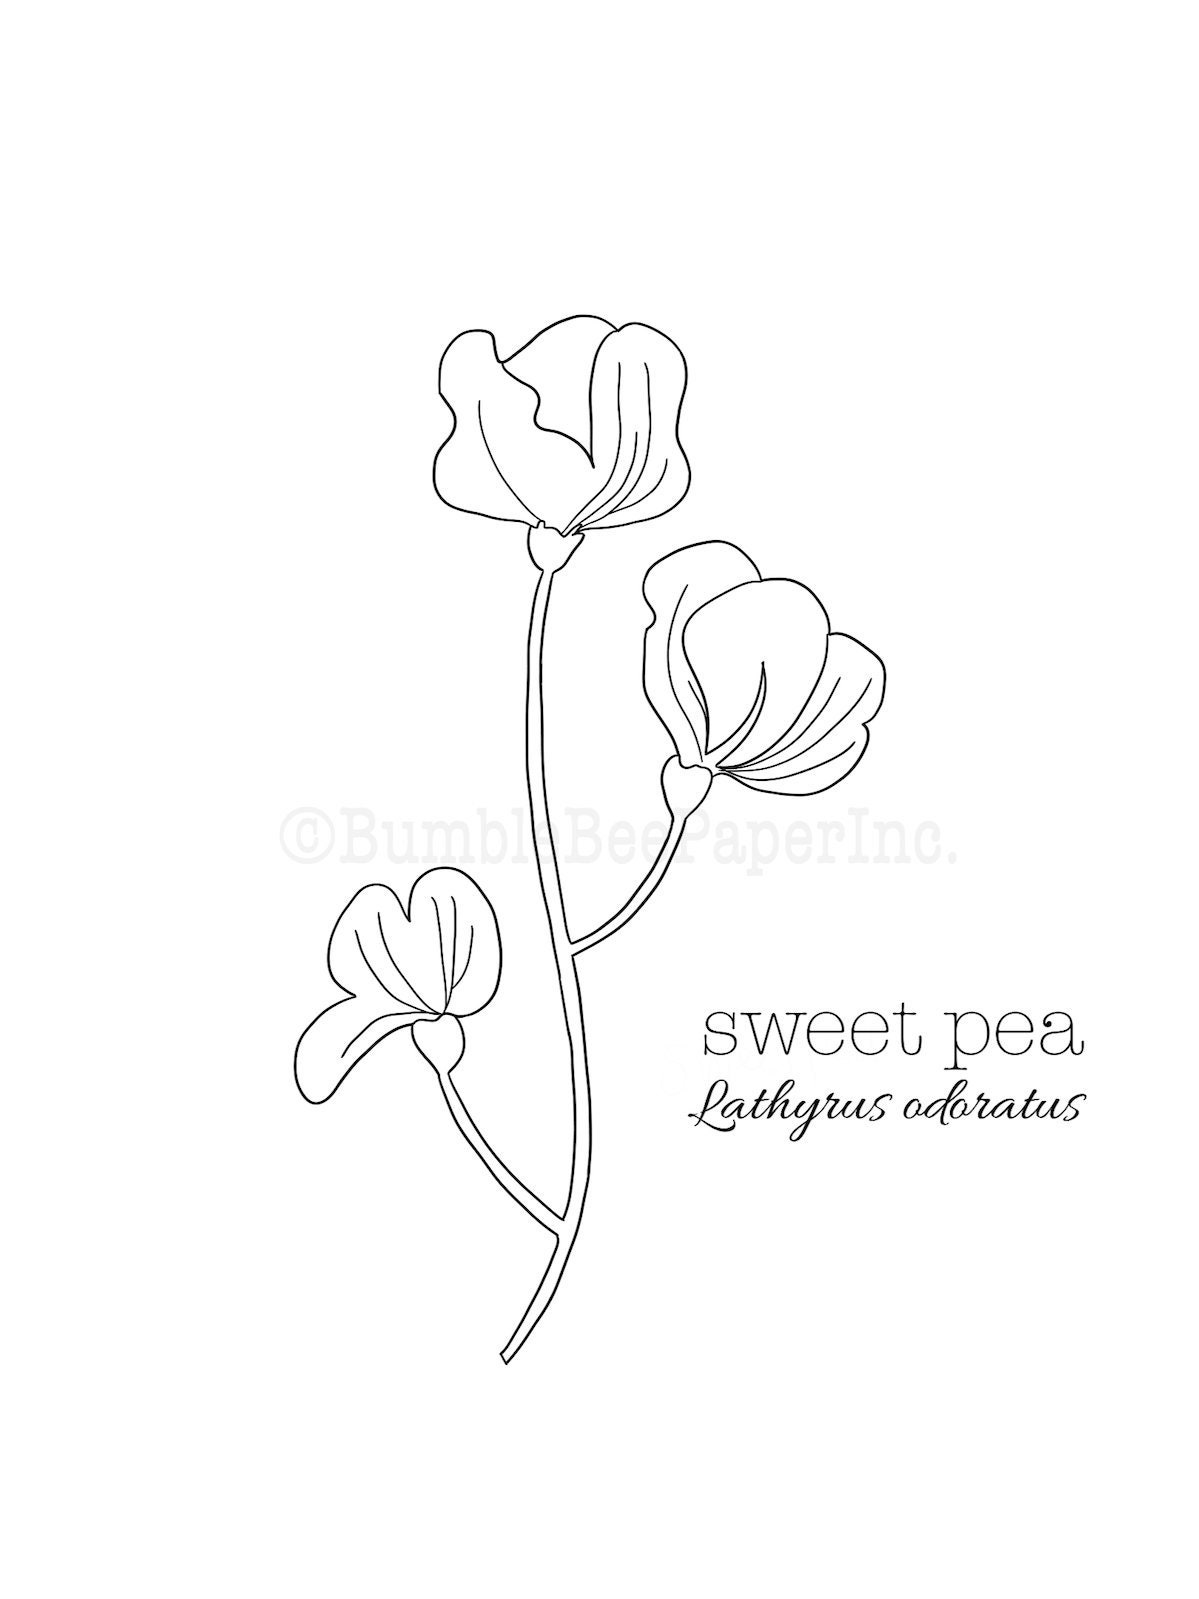 How to draw SWEET PEA «